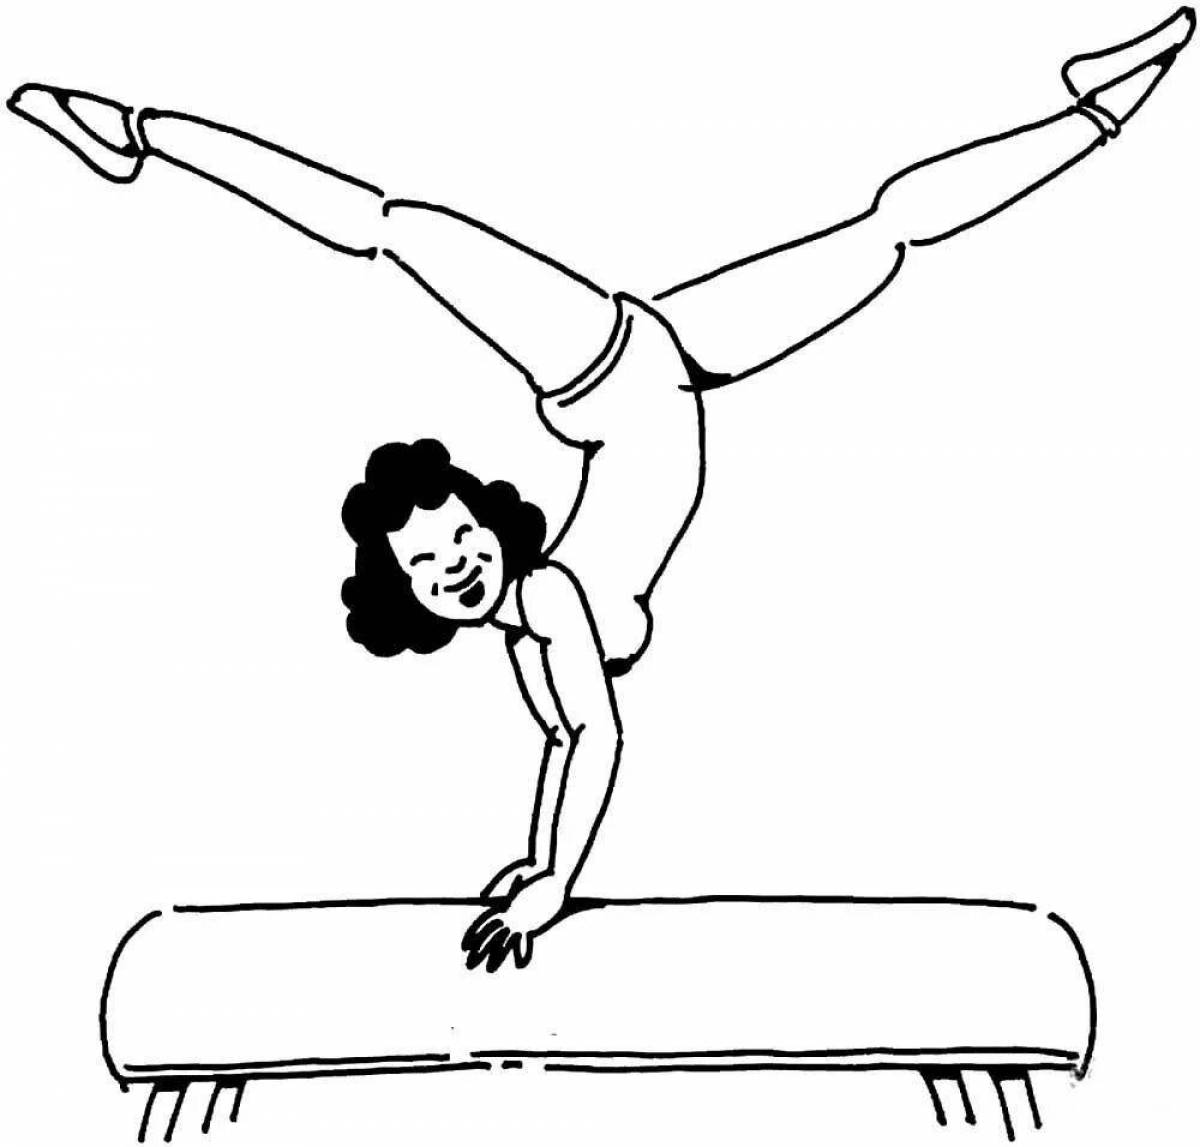 Exciting gymnastic coloring book